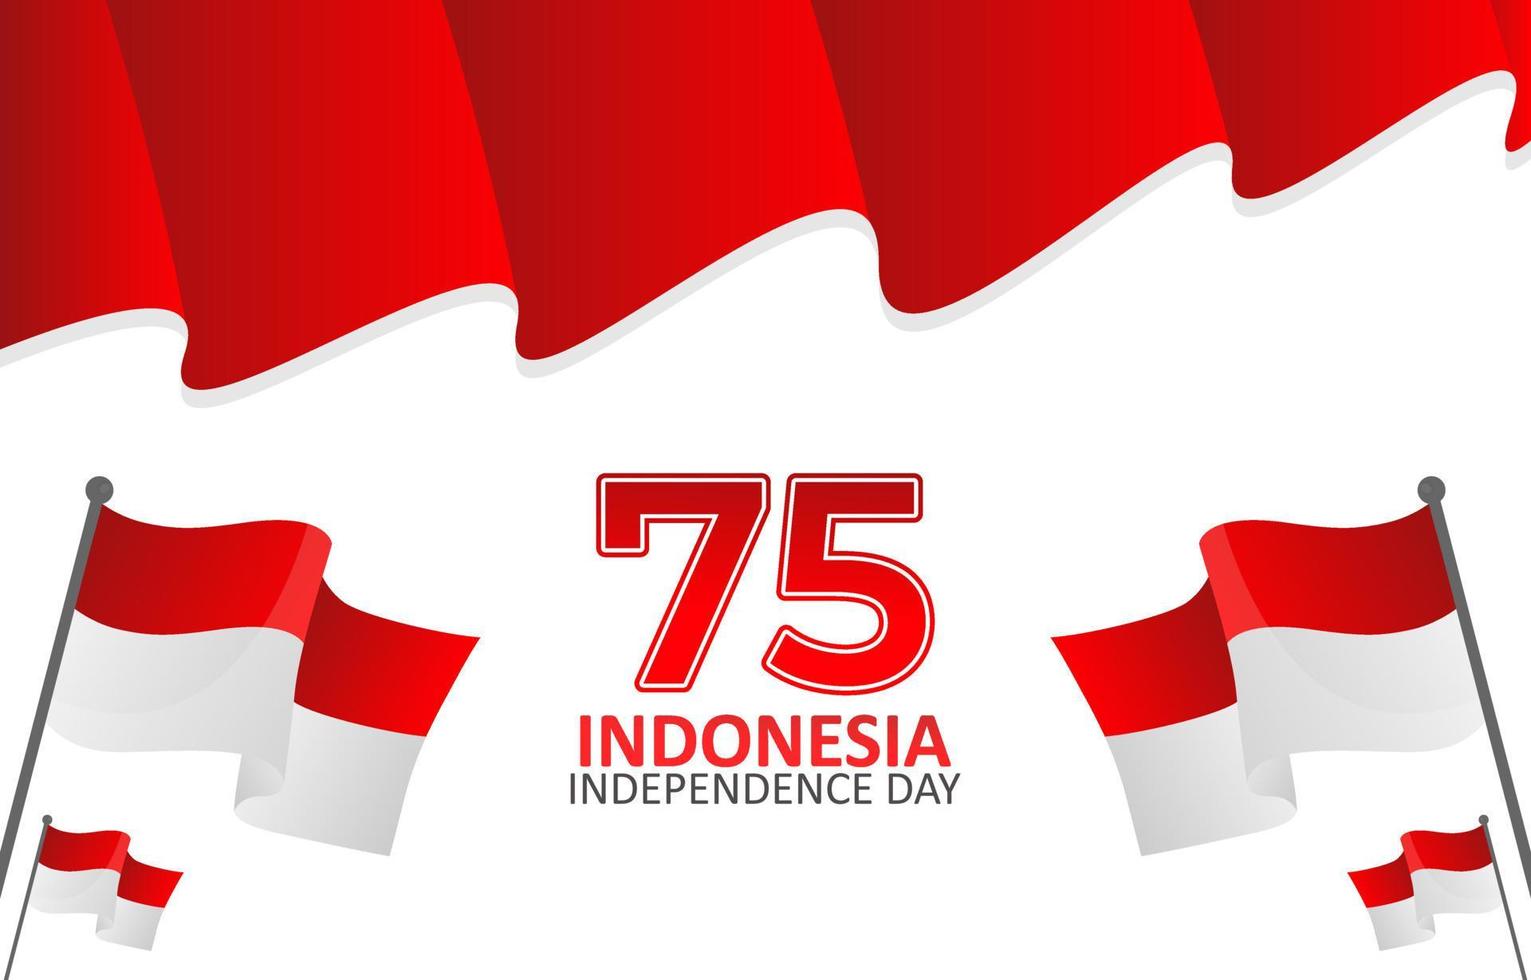 Illustration Vector Graphic Of 75th Indonesian Independence Day Greeting Cards And Posters, Design Suitable for Indonesian Independence Day